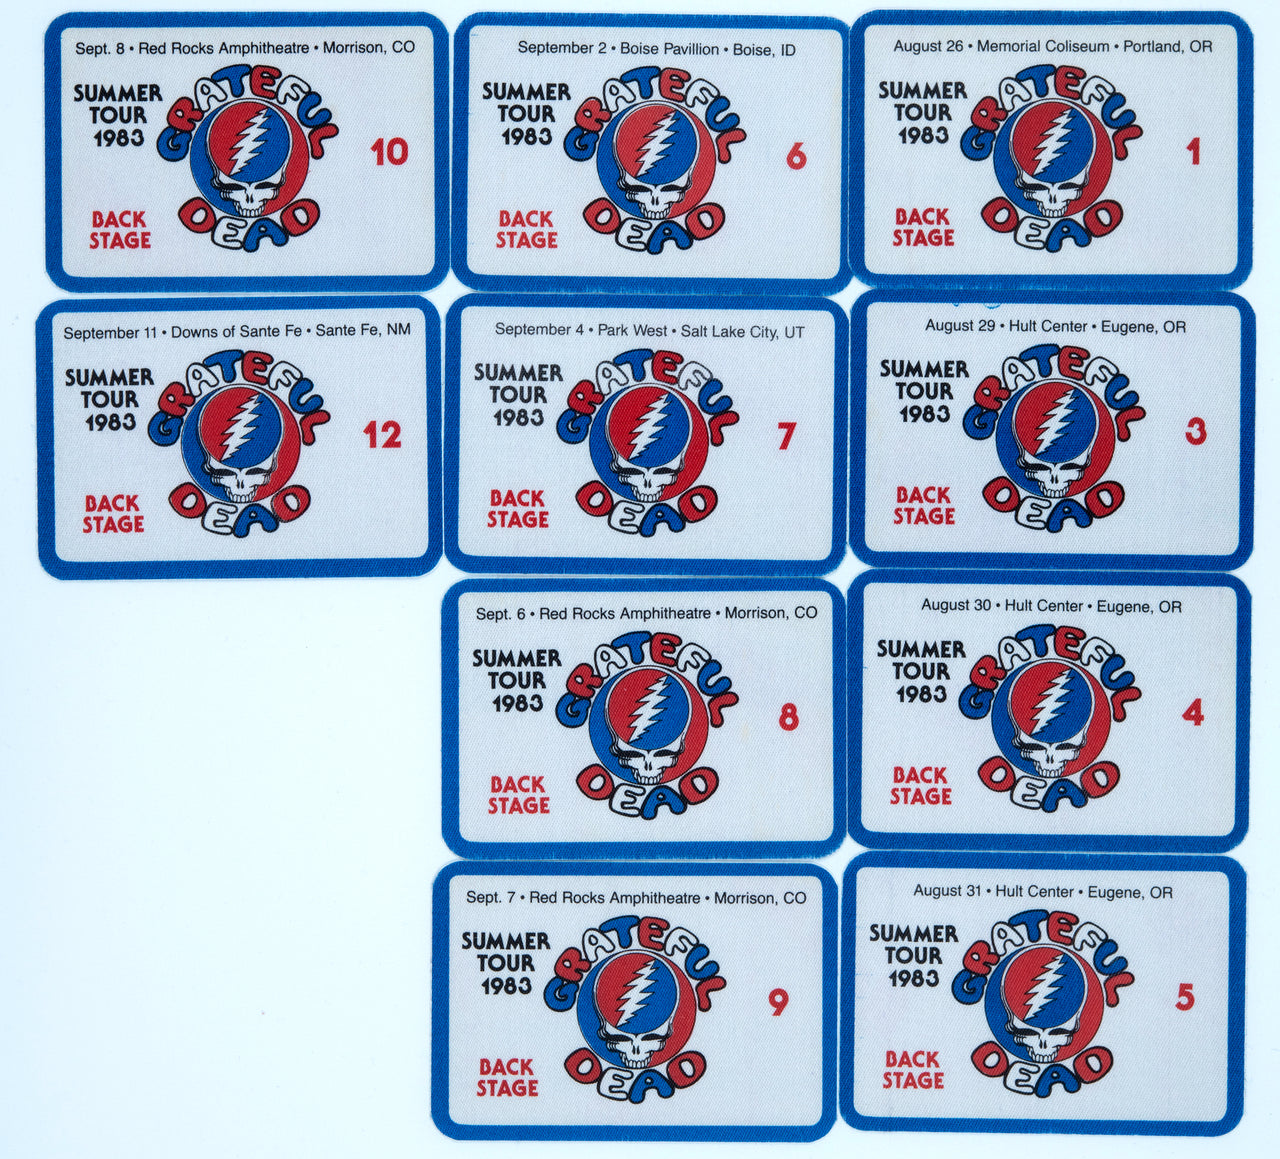 Grateful Dead Backstage Passes (8/26/1983 - 9/11/1983) from Dan Healy